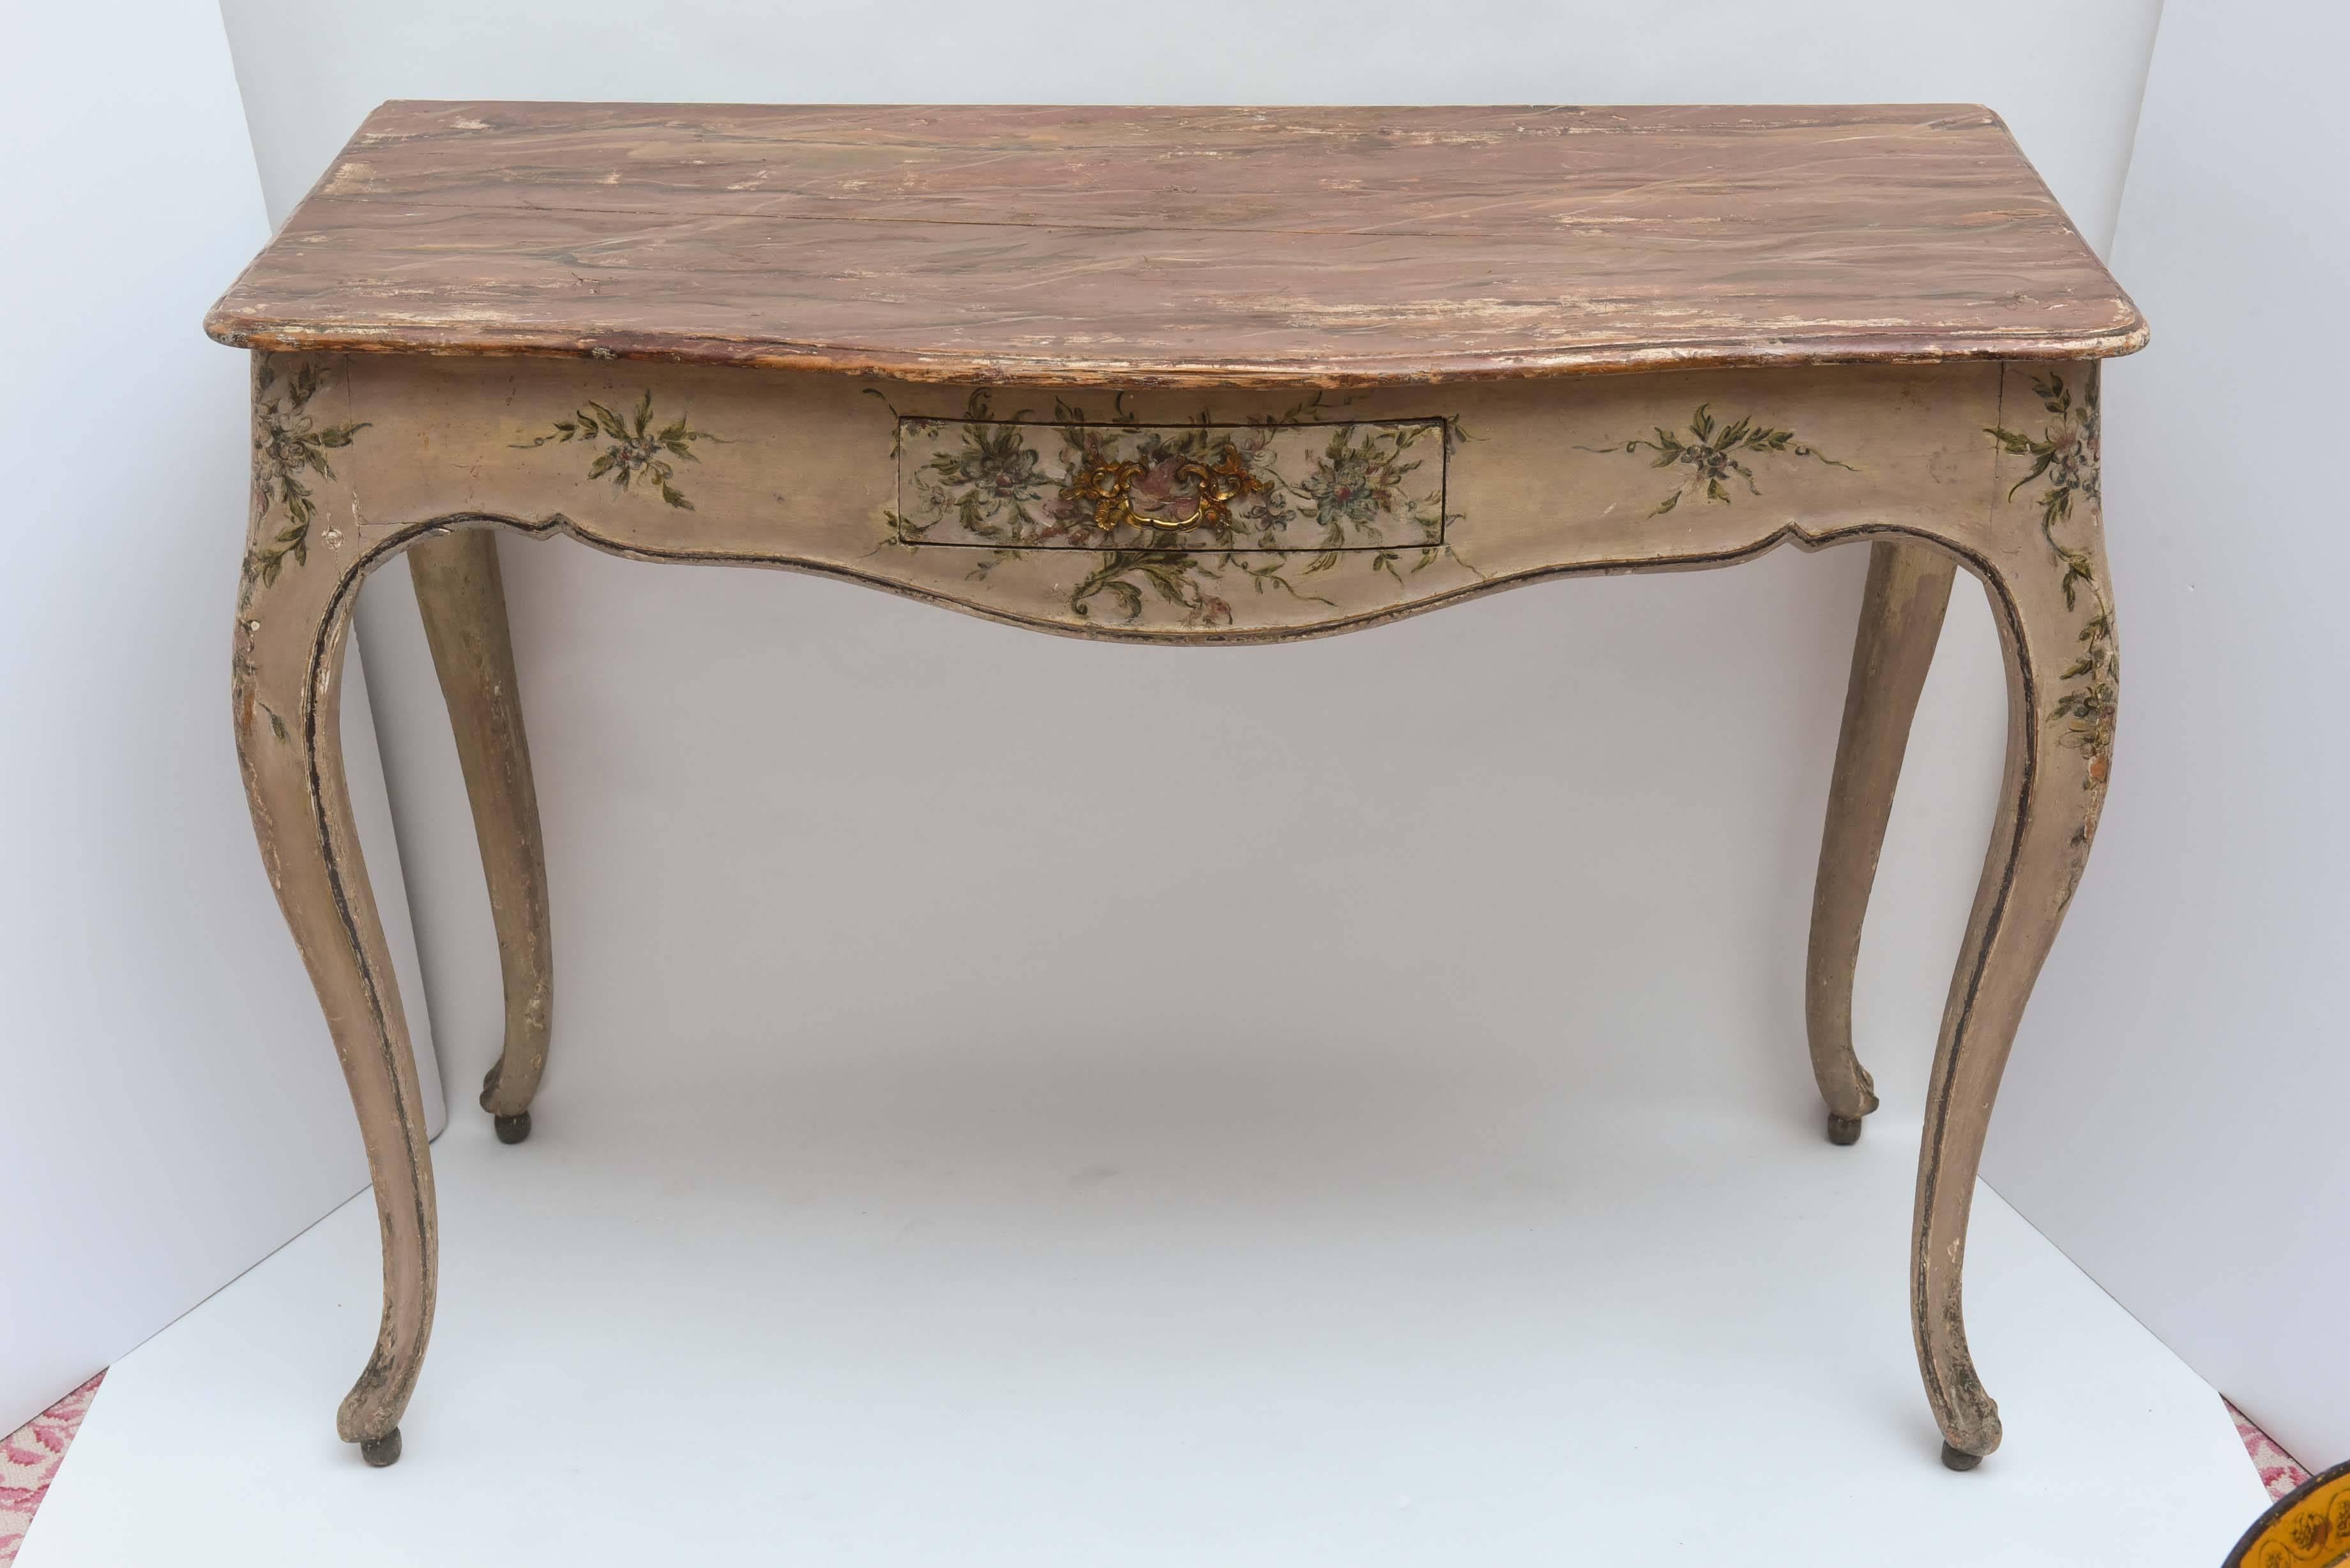 A fine Venetian ladies desk with original floral painting. Elegant style and dimensions.